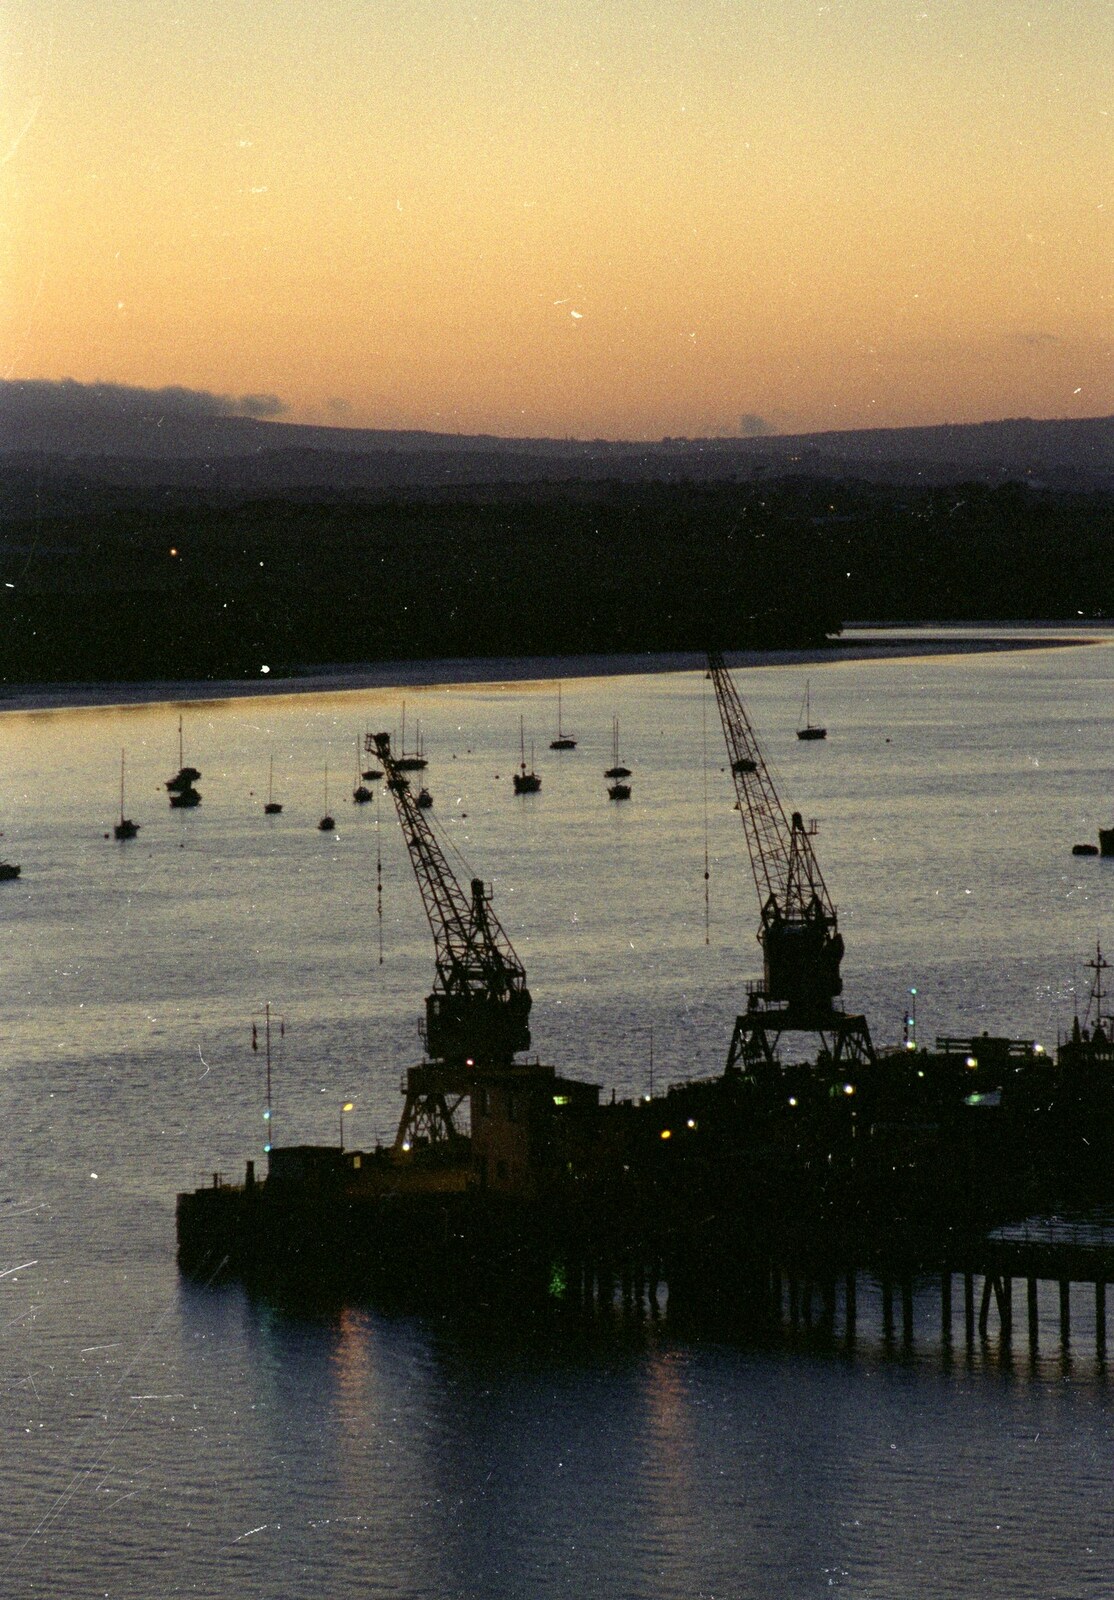 Uni: A Trip to Swindon, Shaftesbury, and the Tamar Bridge, Wiltshire, Dorset and Devon - 28th May 1989: Cranes on an evening river Tamar